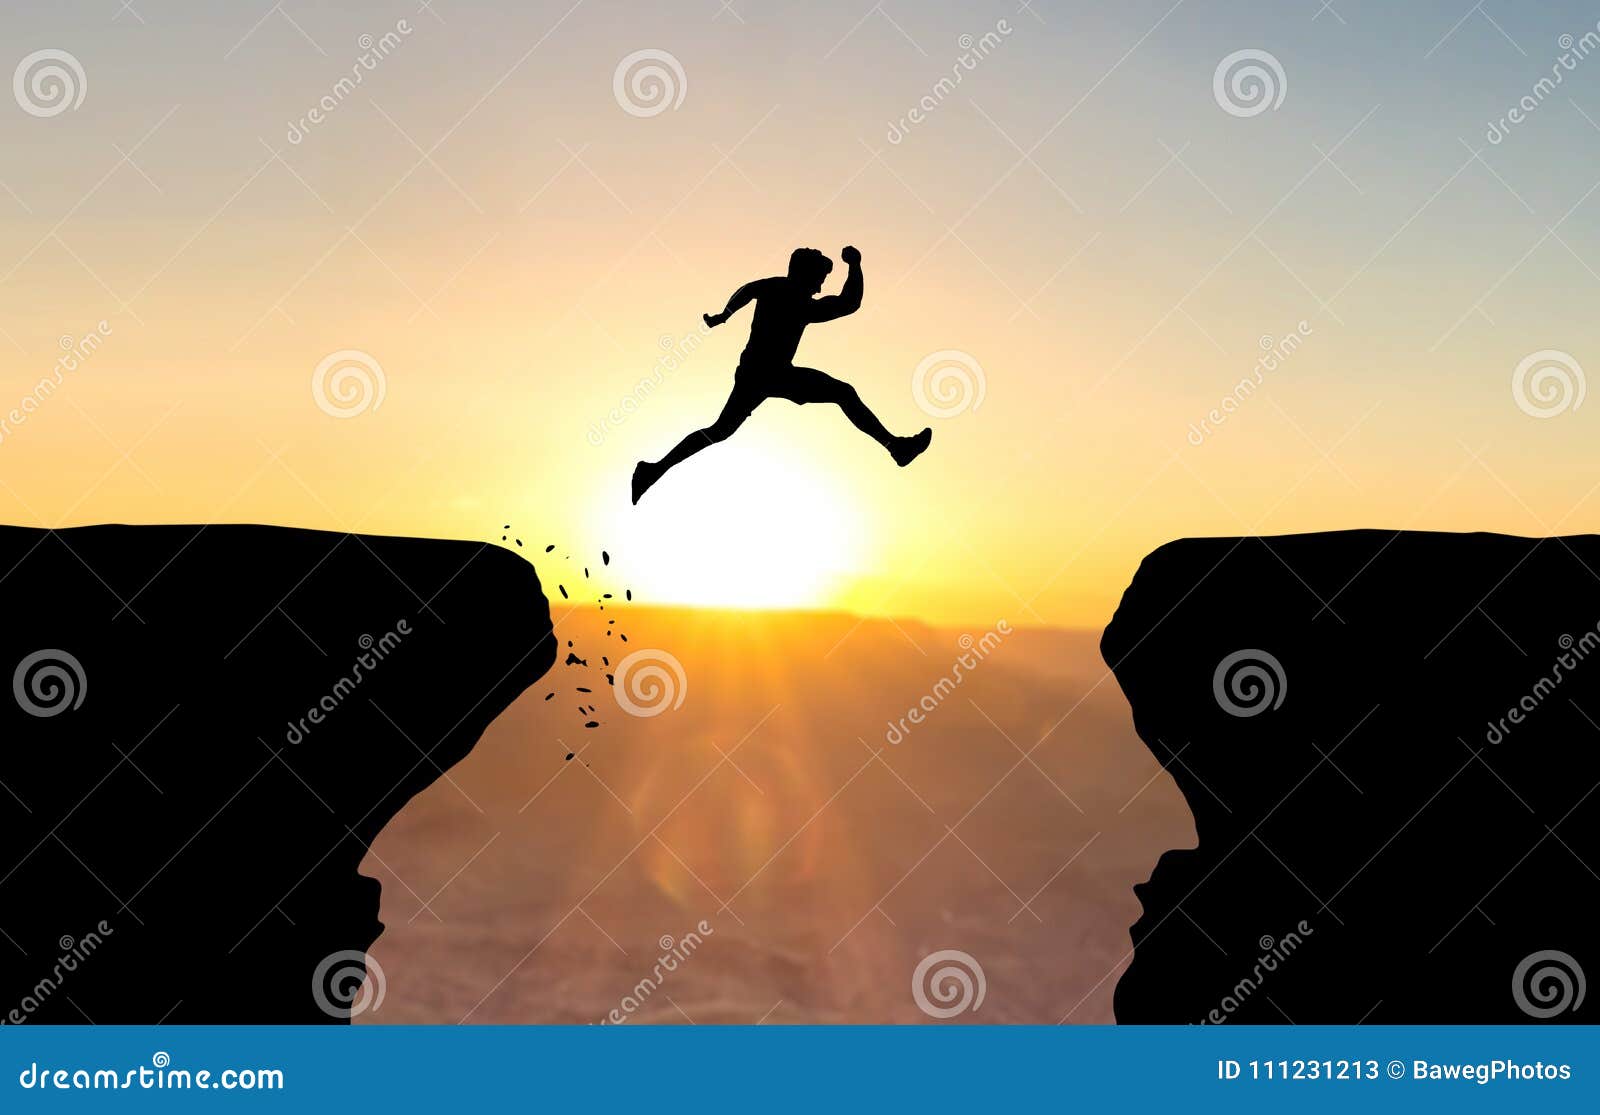 man jumping over abyss.